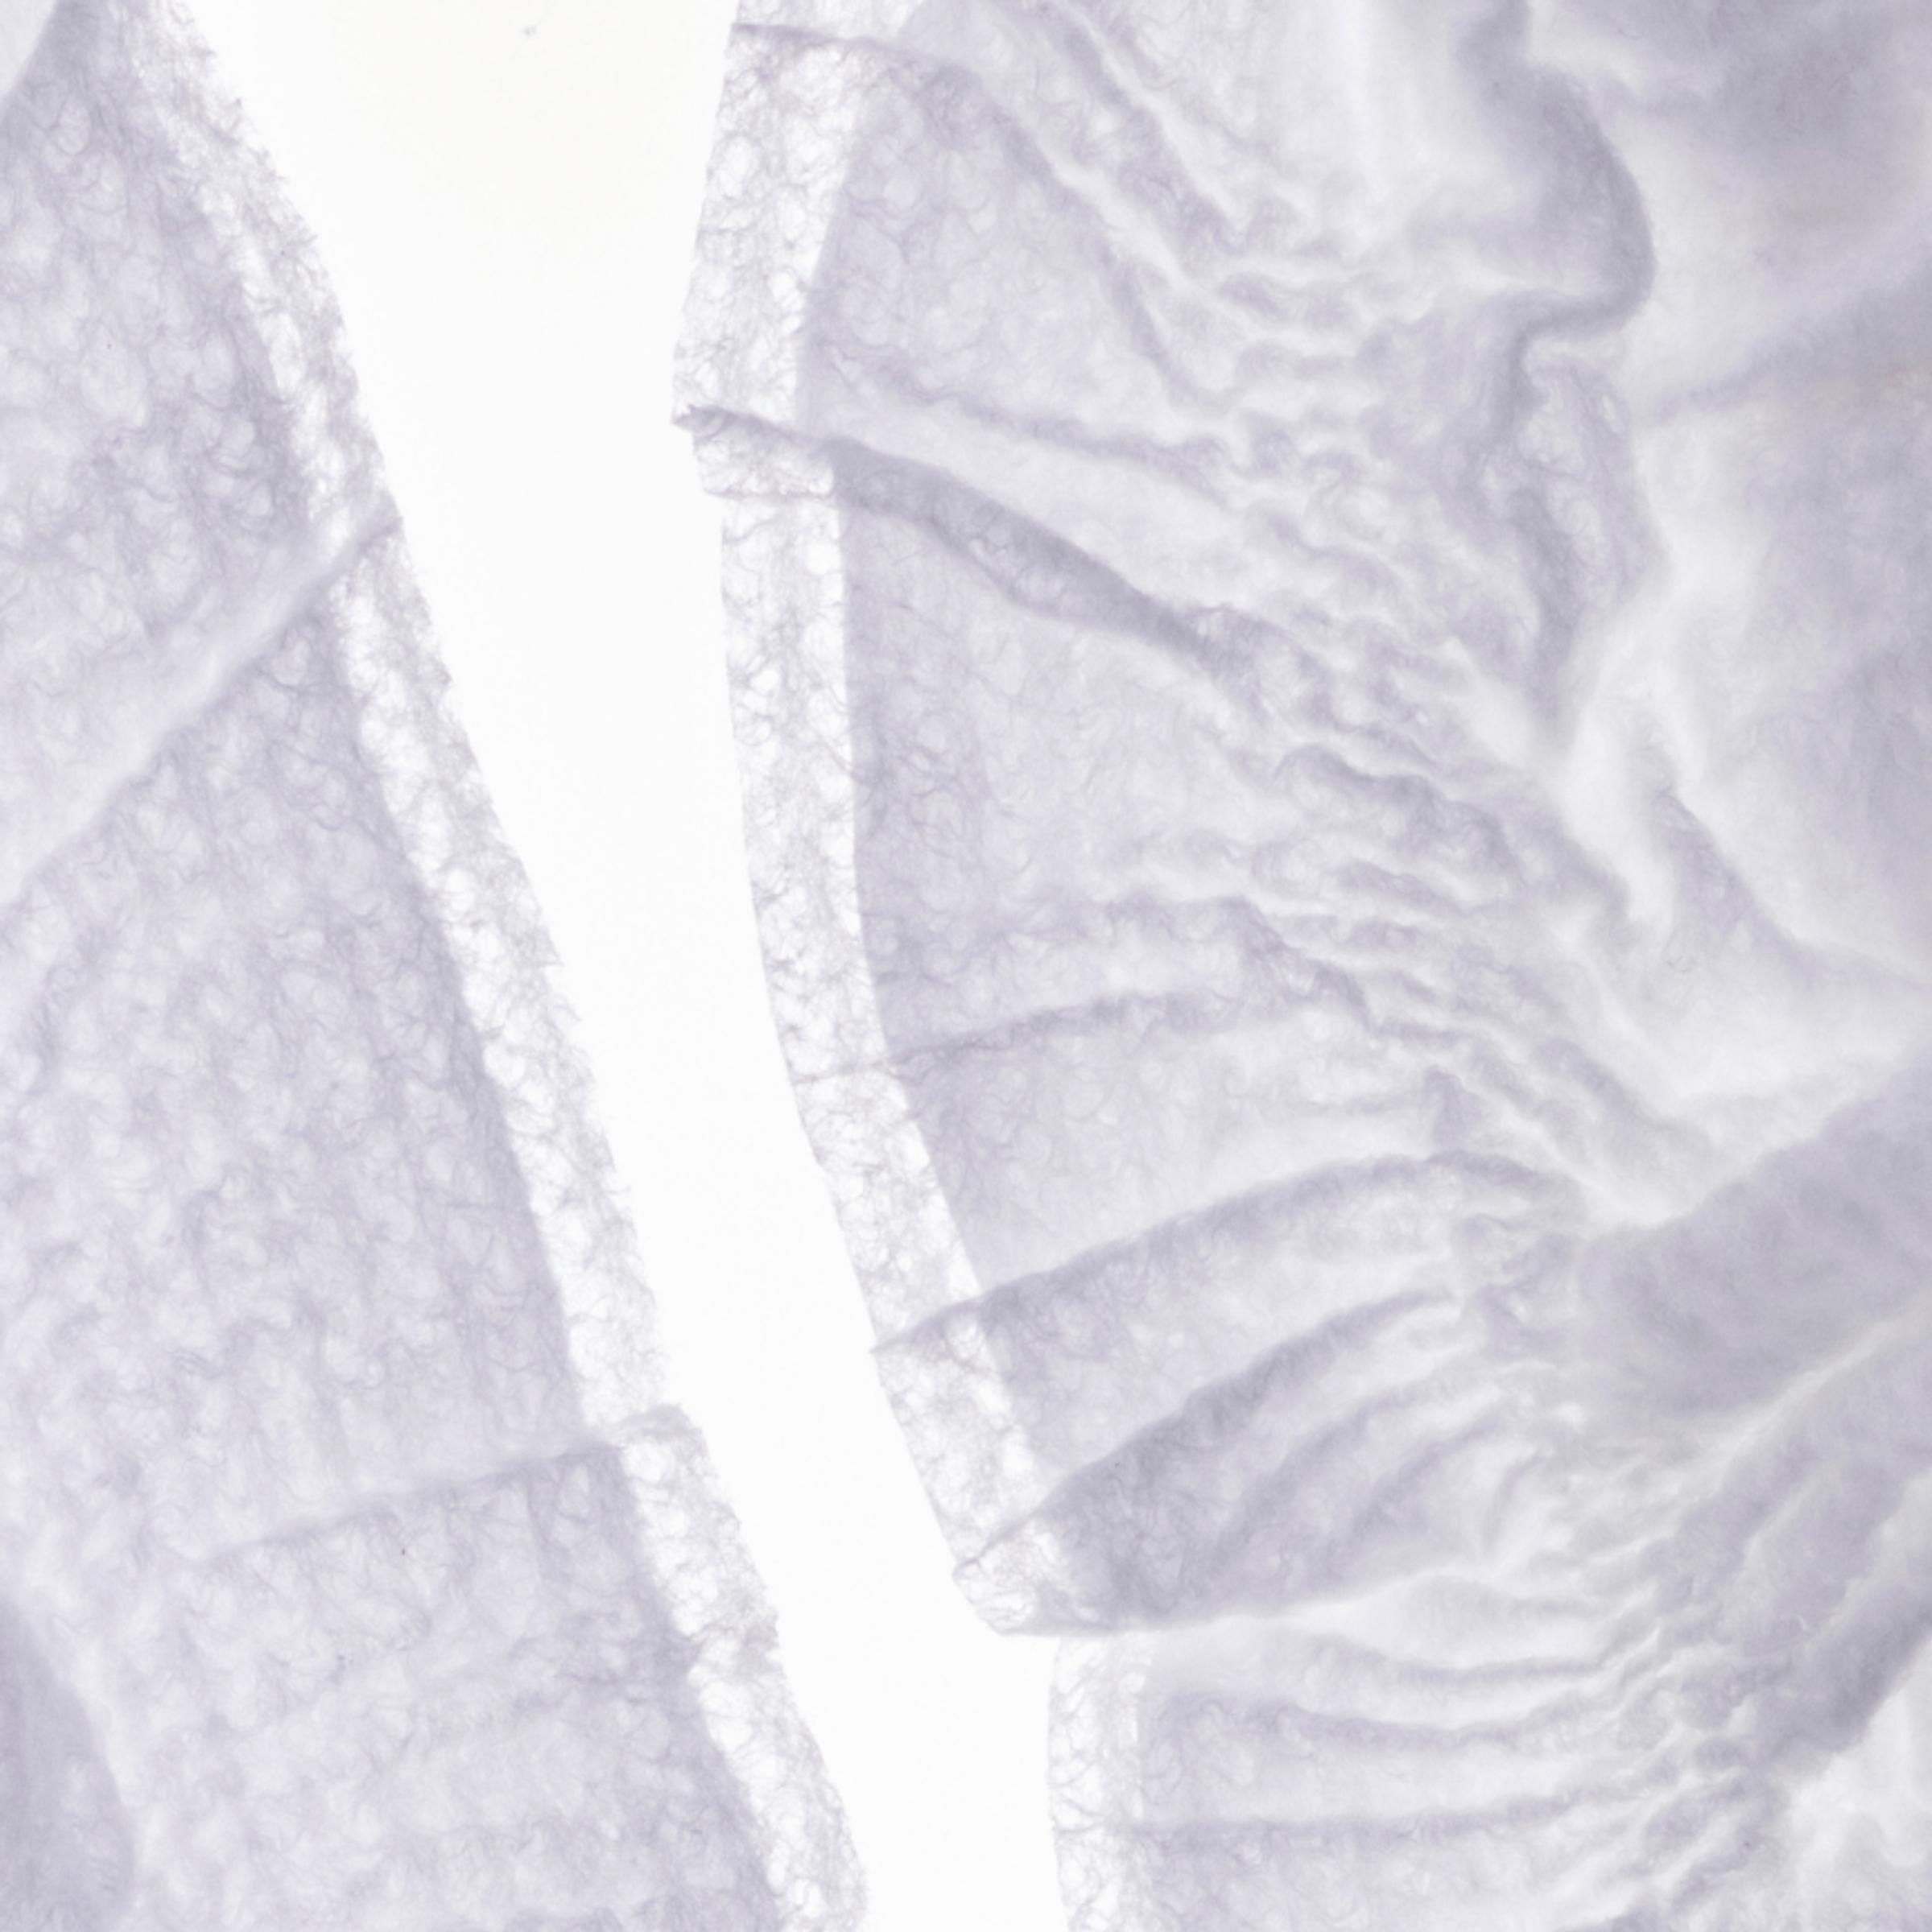 A close up image of a Coterie diaper that shows fine details such as texture, color and softness.